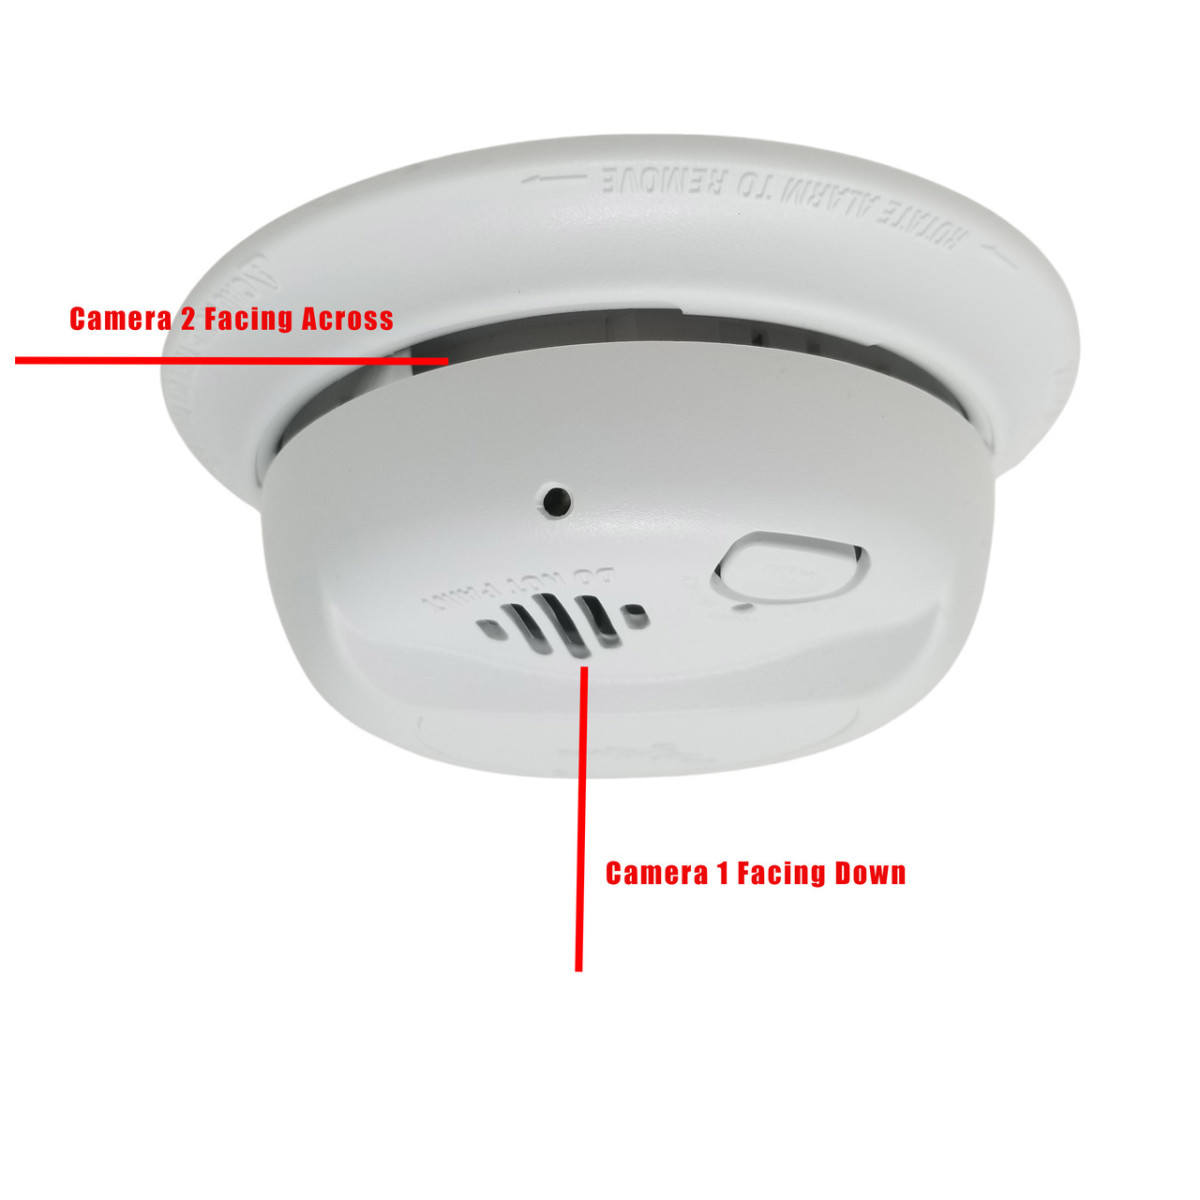 Example of a real fire alarm that also has a wireless video camera